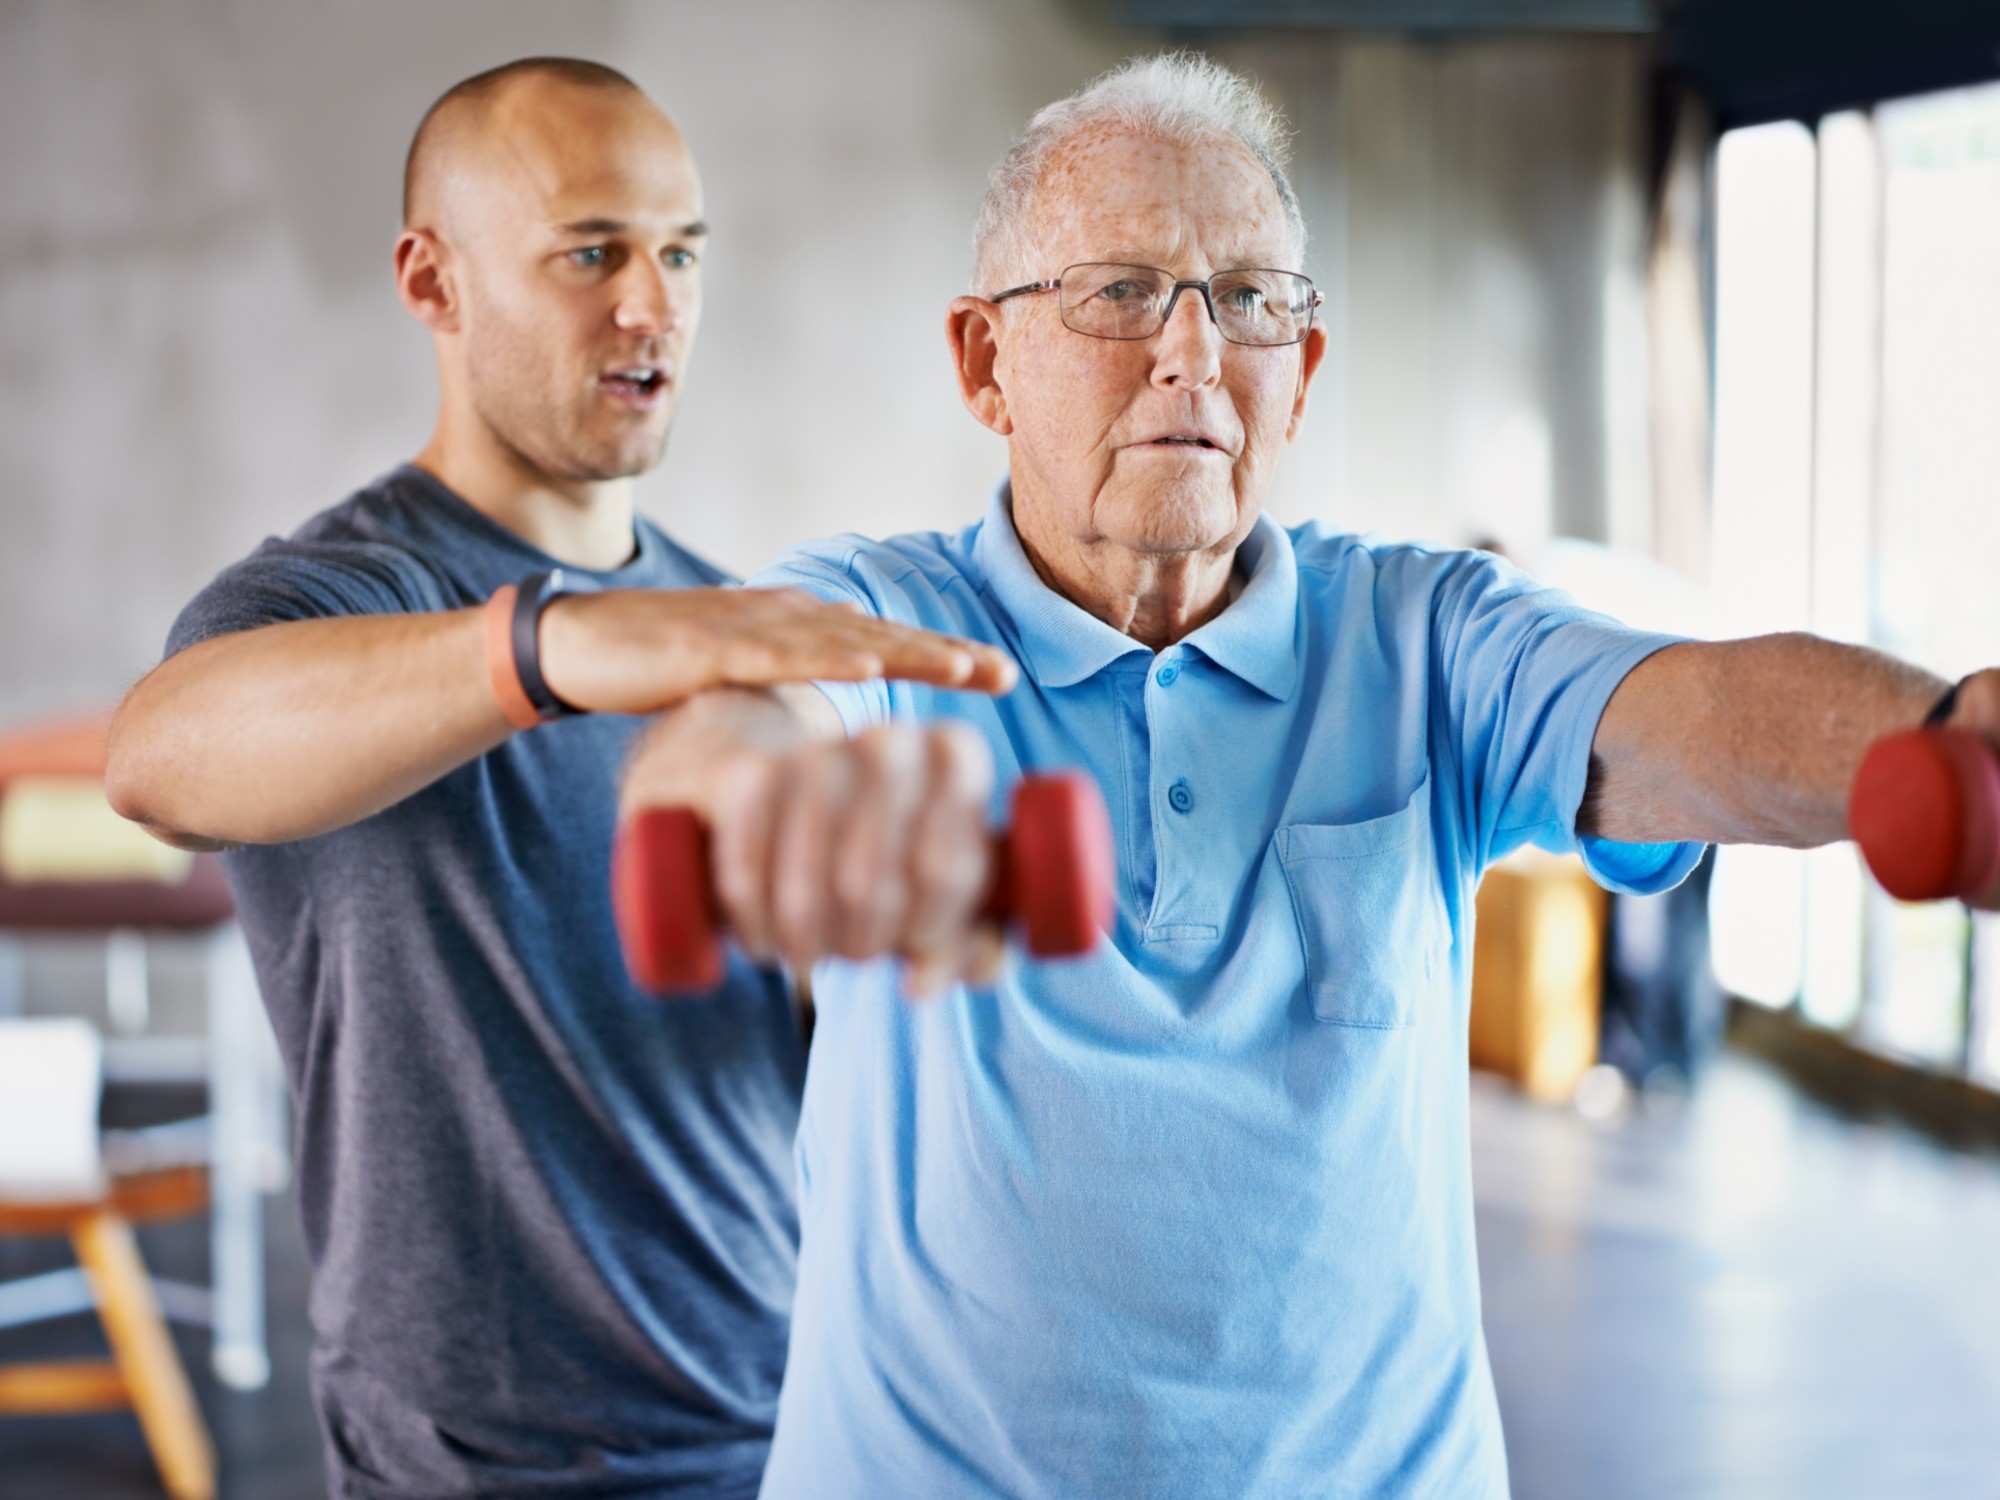 A physiotherapist is helping an older man exercise